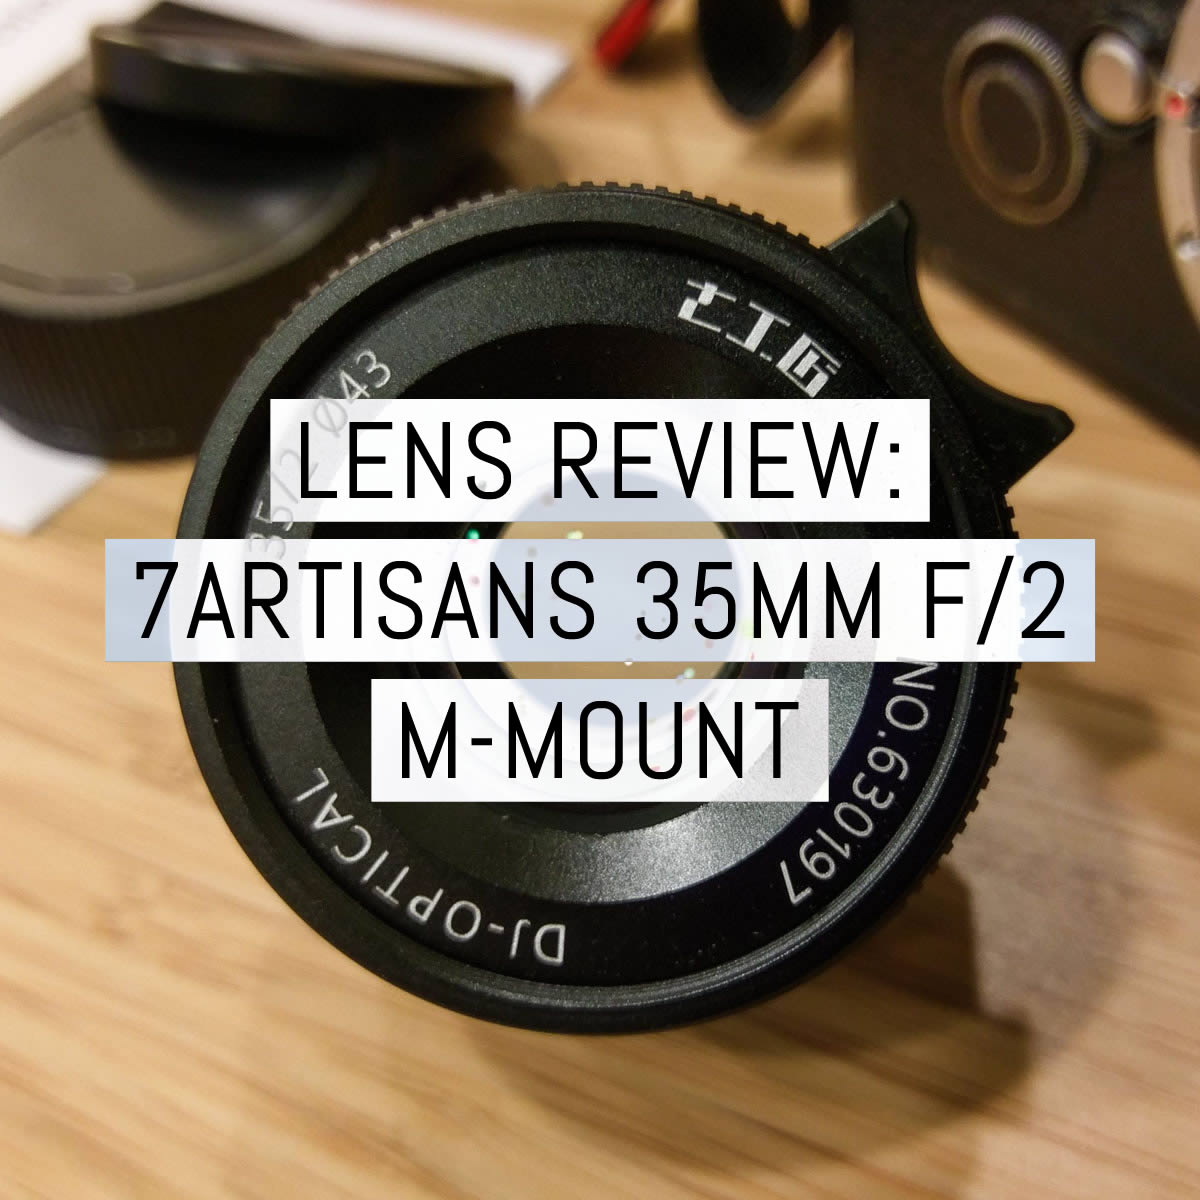 Lens review: the 7artisans 35mm f/2 Leica M-mount lens – first production batch exclusive